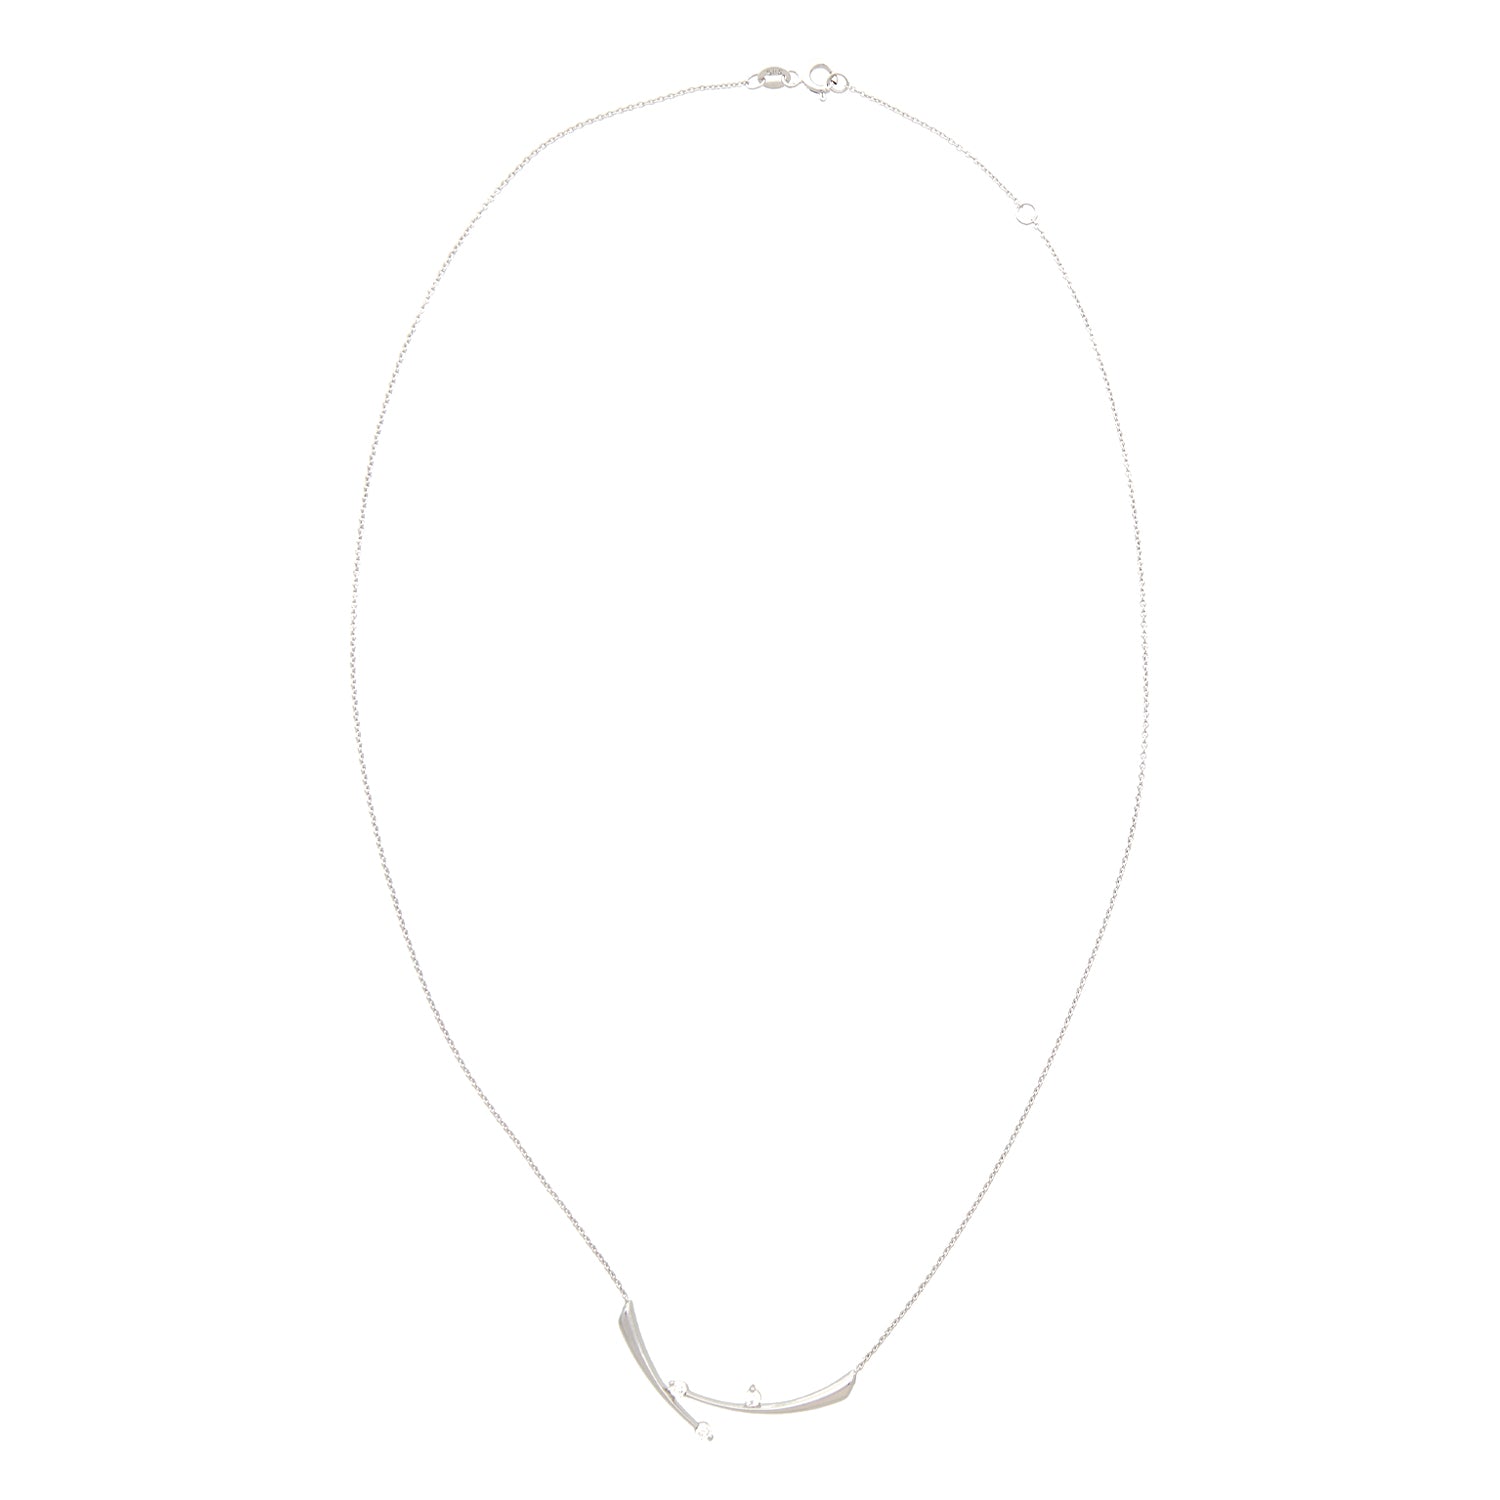 WHITE GOLD NECKLACE WITH DIAMOND